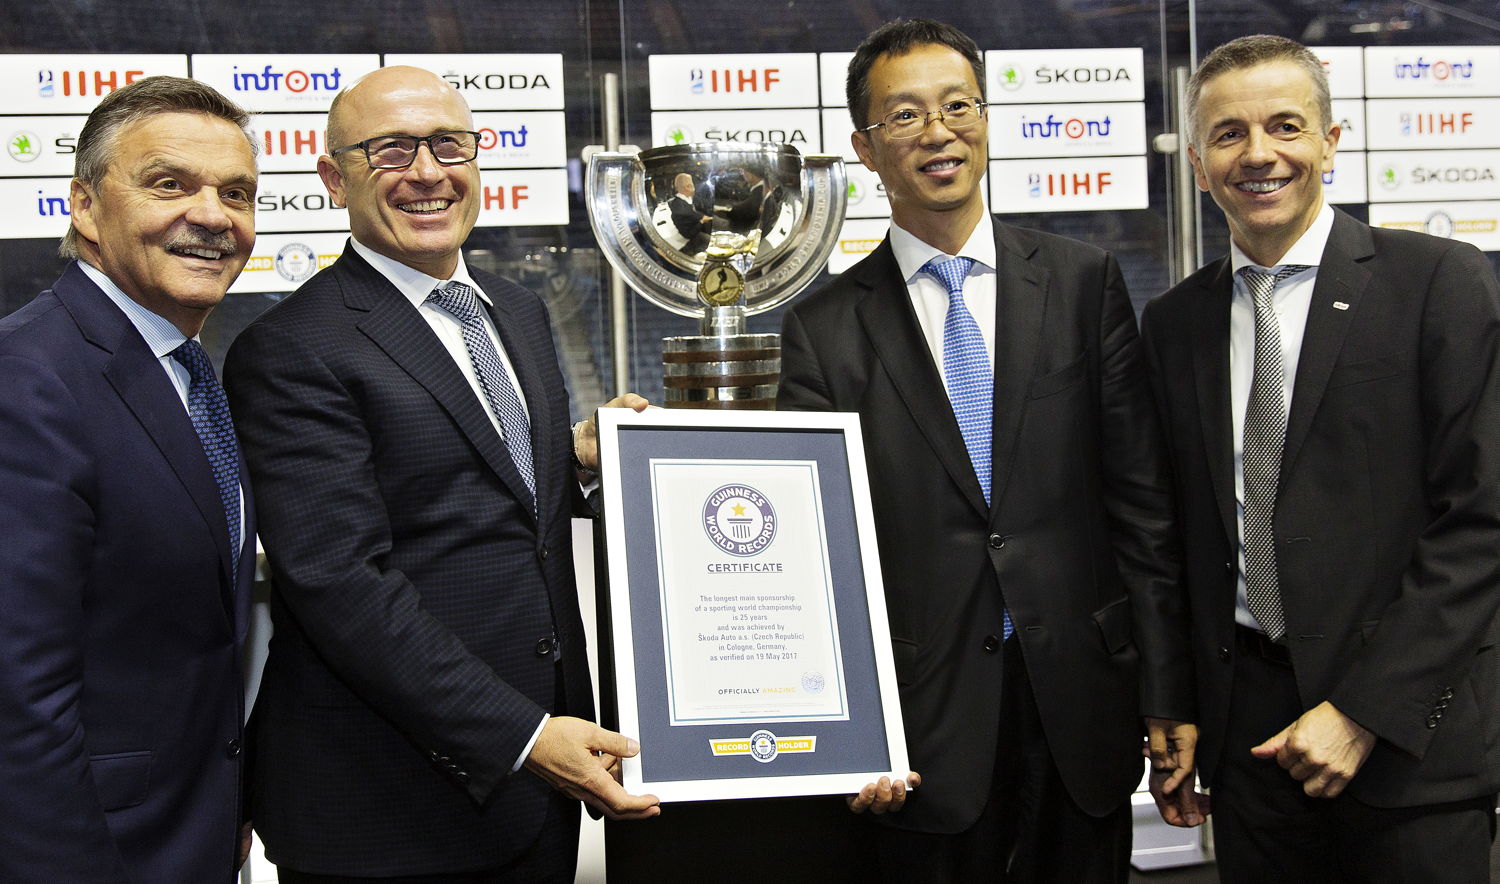 The contract to extend the partnership was signed by IIHF President Dr. René Fasel, ŠKODA CEO Bernhard Maier, Chairman Wanda Sports Holding Lincoln Zhang and President and CEO of Infront Sports & Media Philippe Blattner on 19 May at the Lanxess Arena in Cologne. The 25-year commitment has been recognized as a GUINNESS WORLD RECORD for 'the longest main sponsorship in the history of sports world championships'.